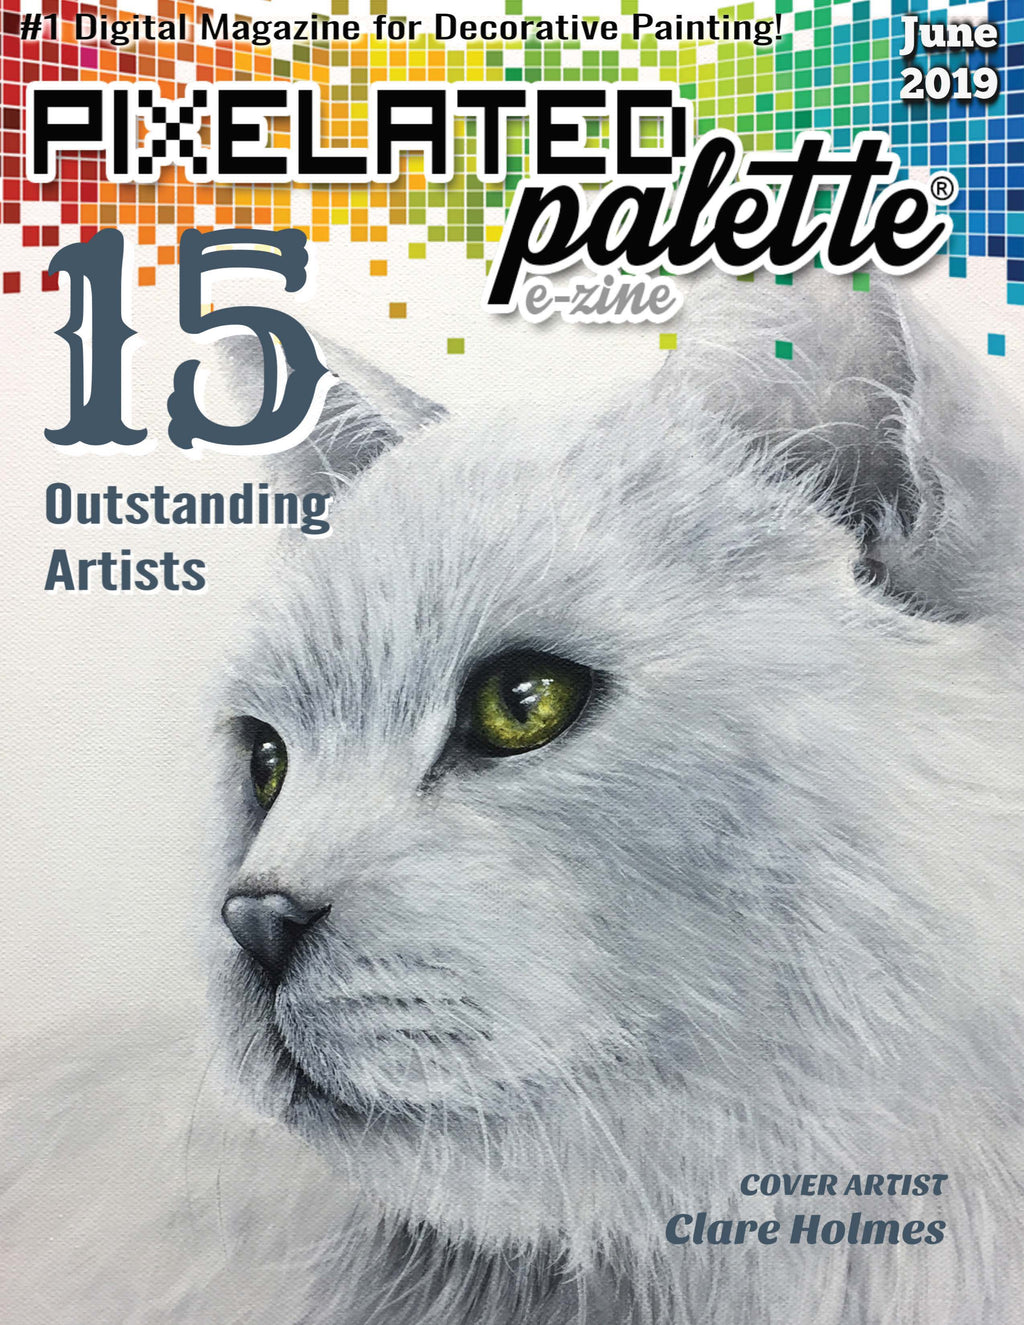 Pixelated Palette - June 2019 Issue Download